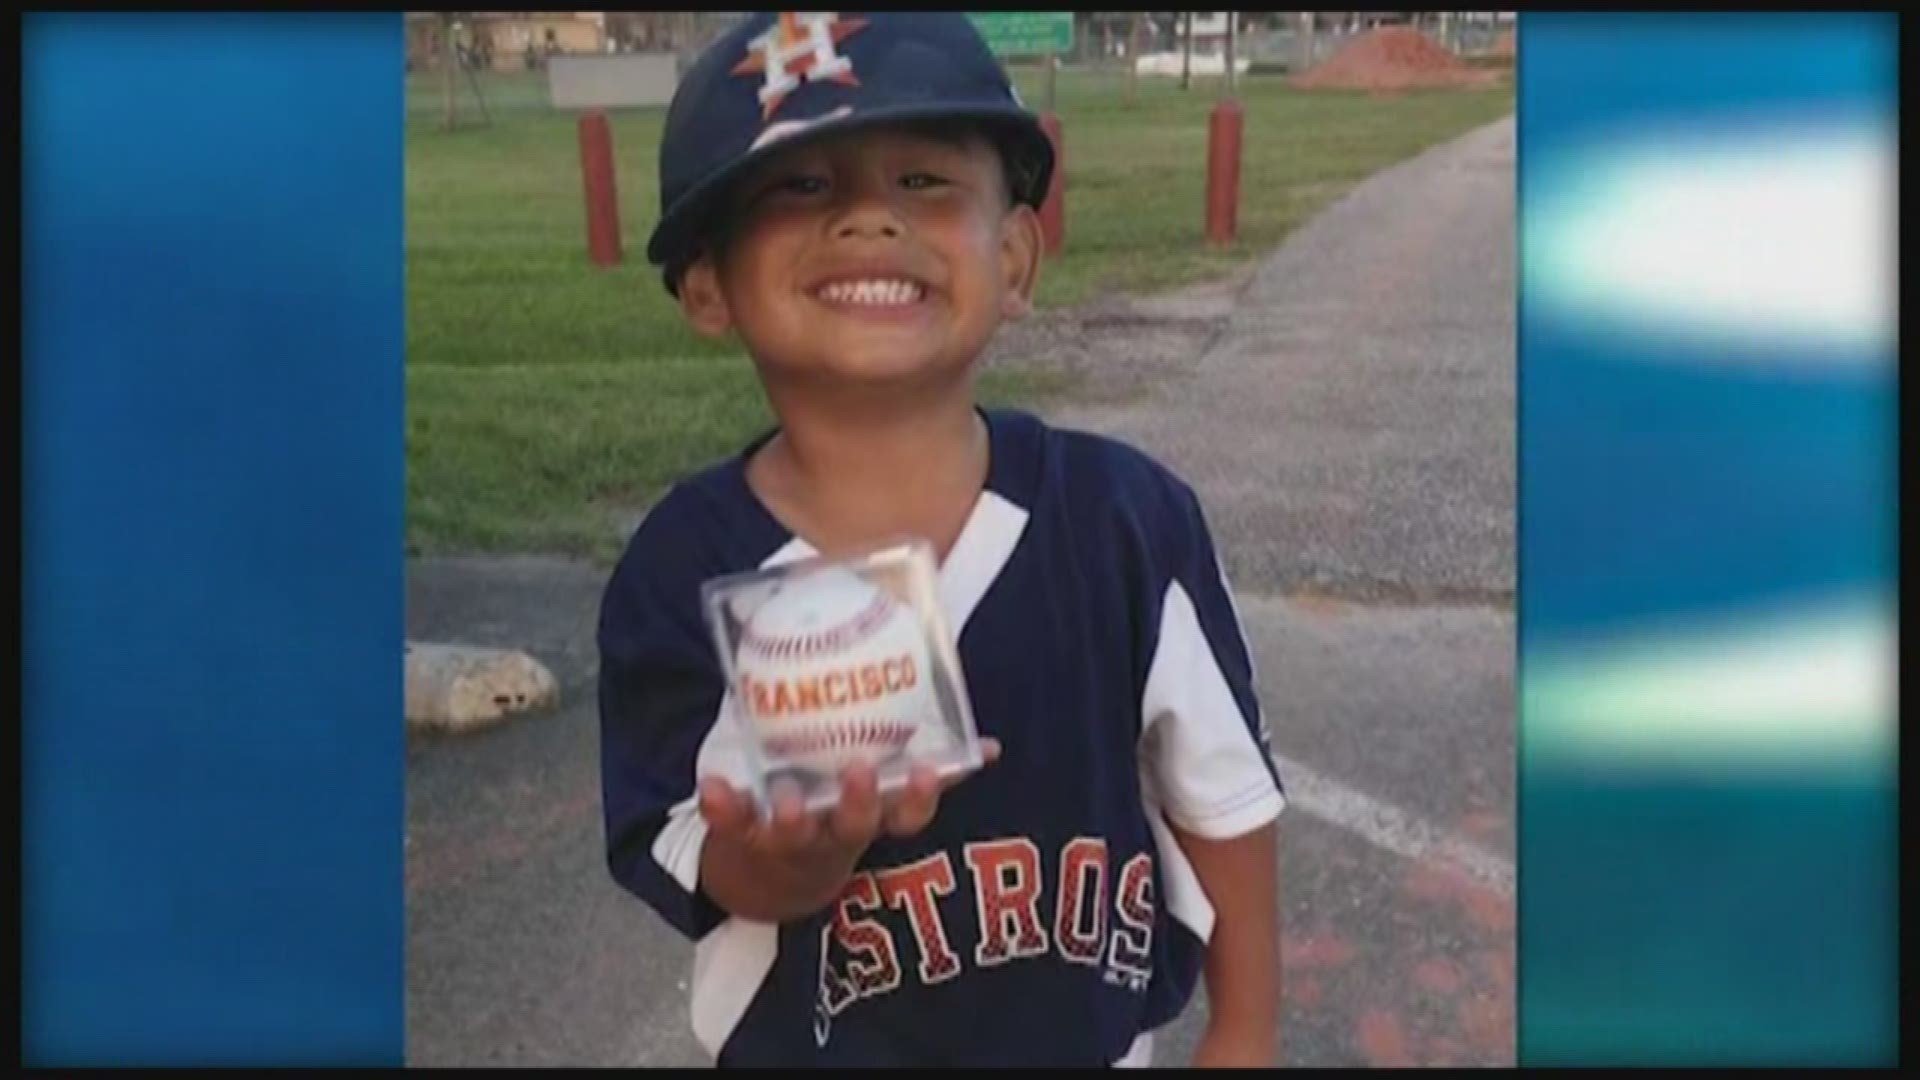 A family, preparing to bury their four-year-old child, wants to warn other parents of the medical condition that cost them their son.